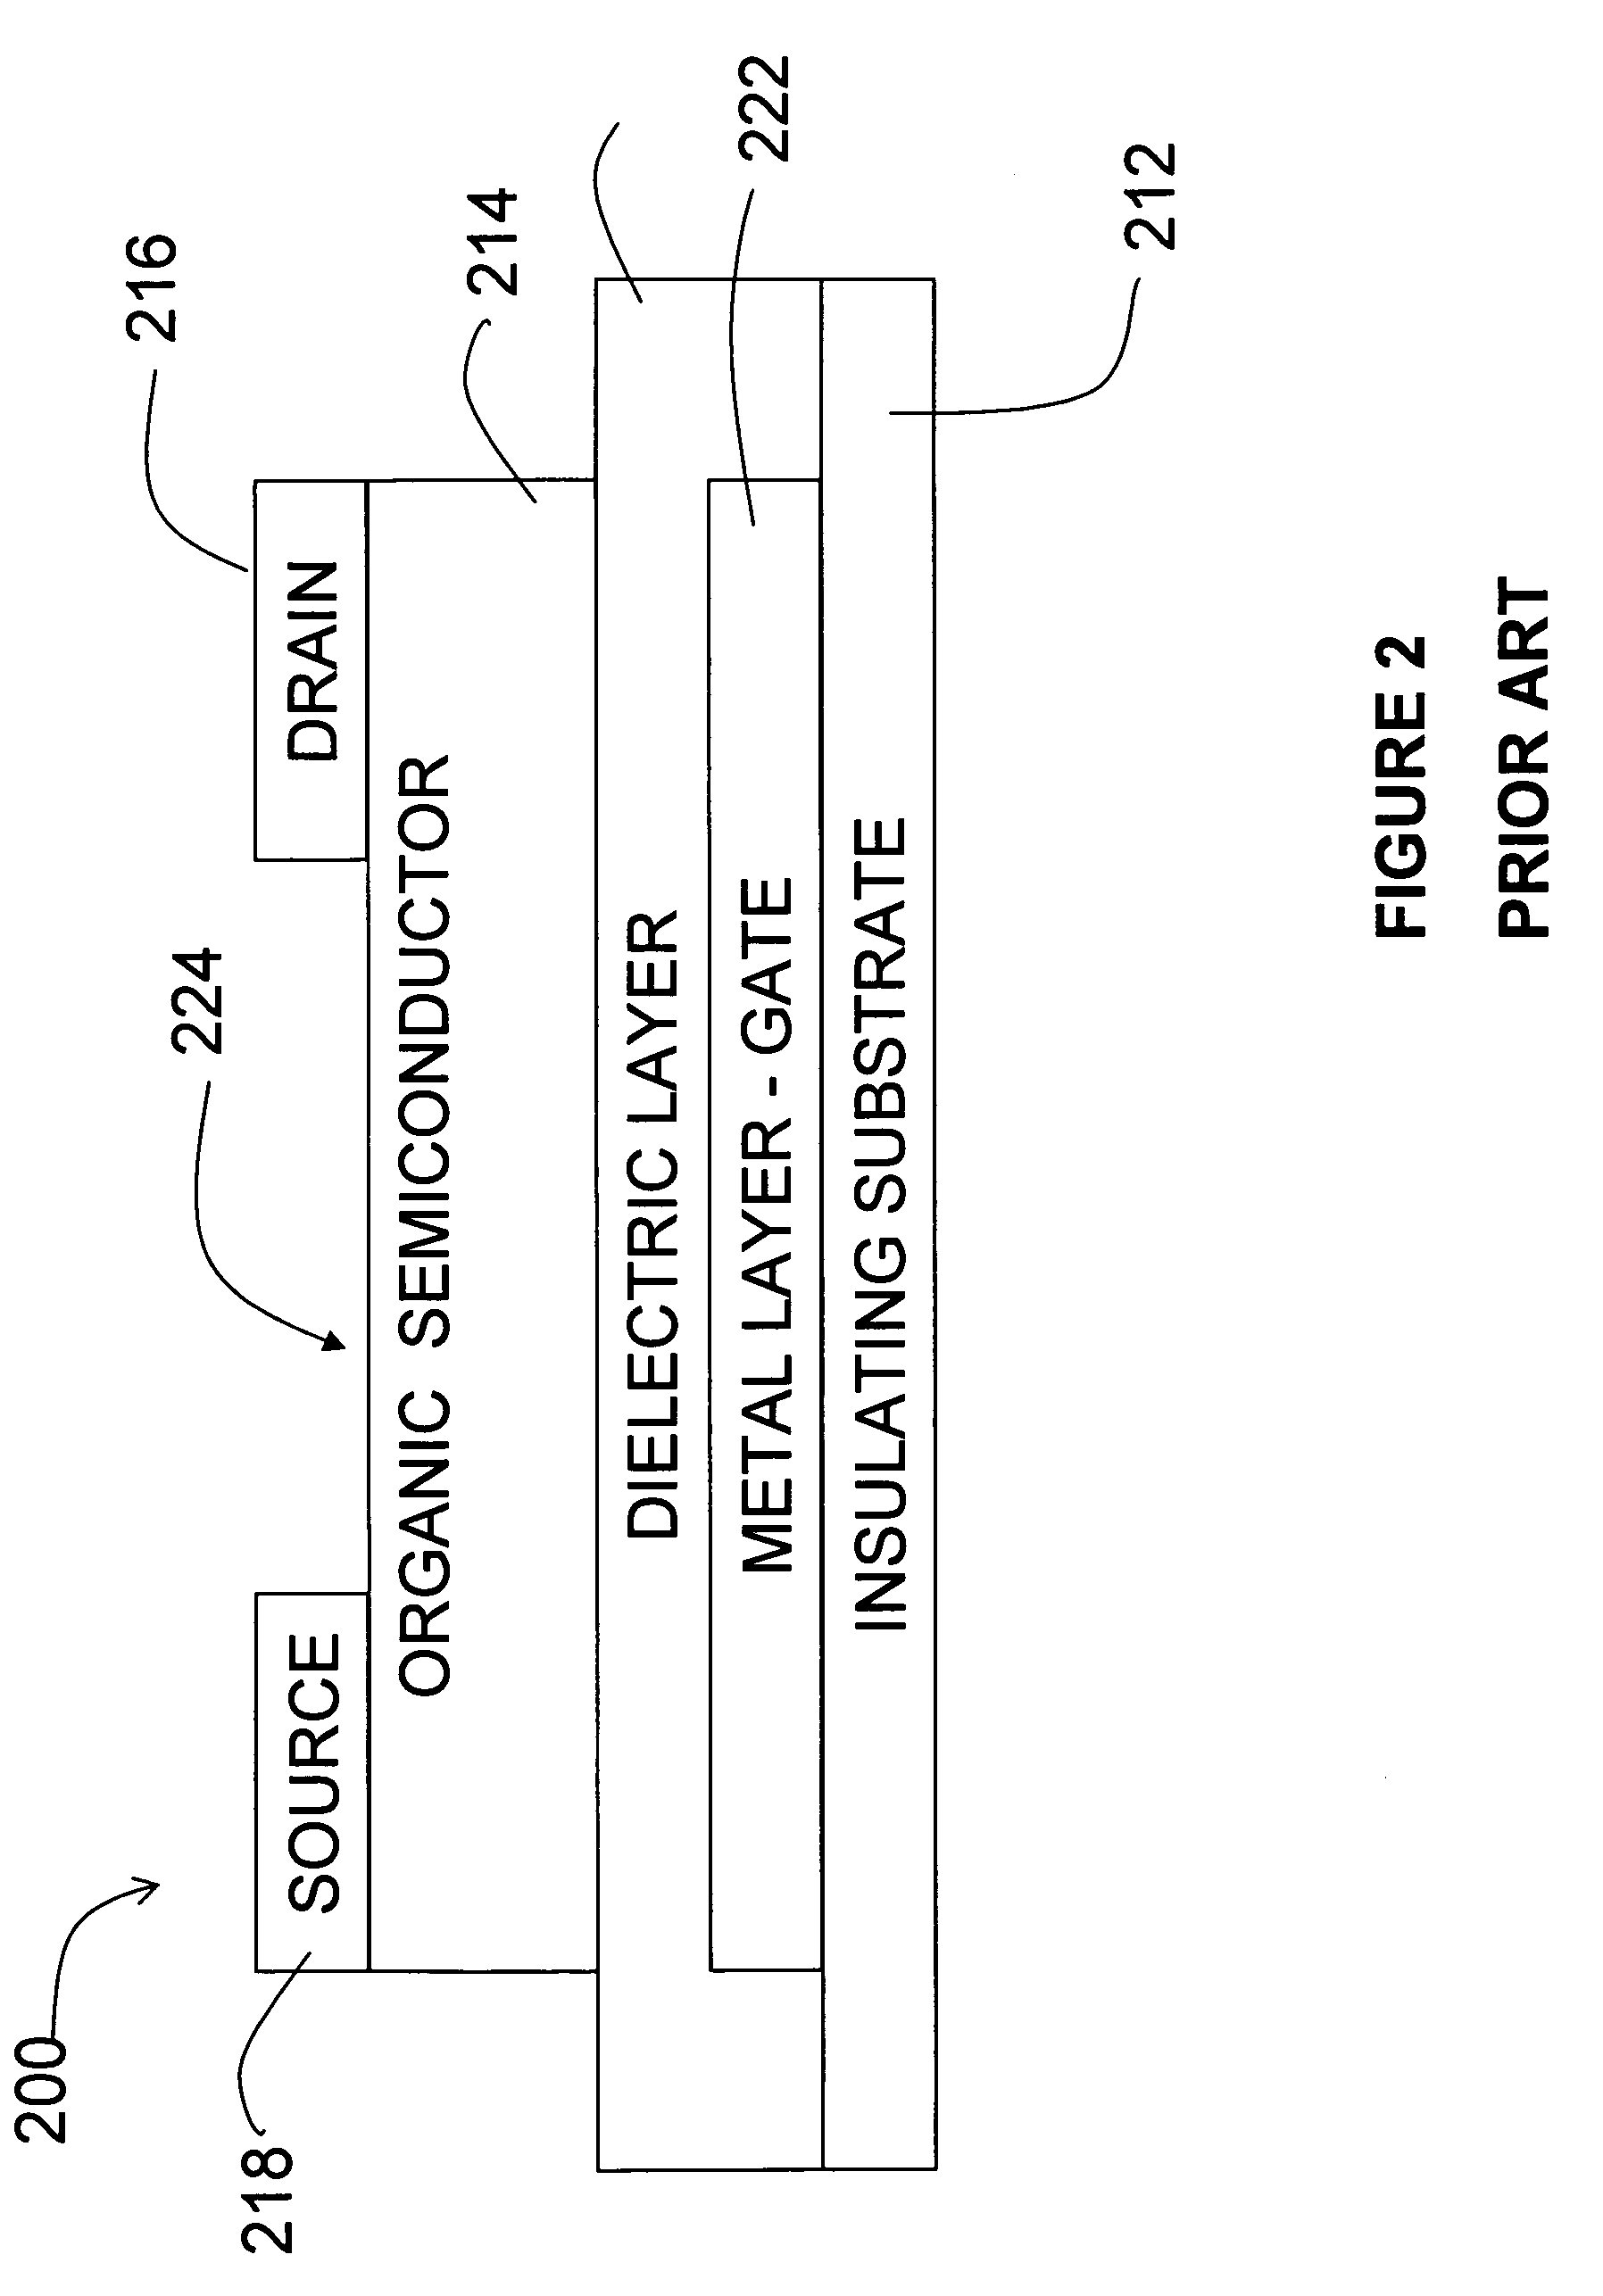 Laser ablation method for fabricating high performance organic devices